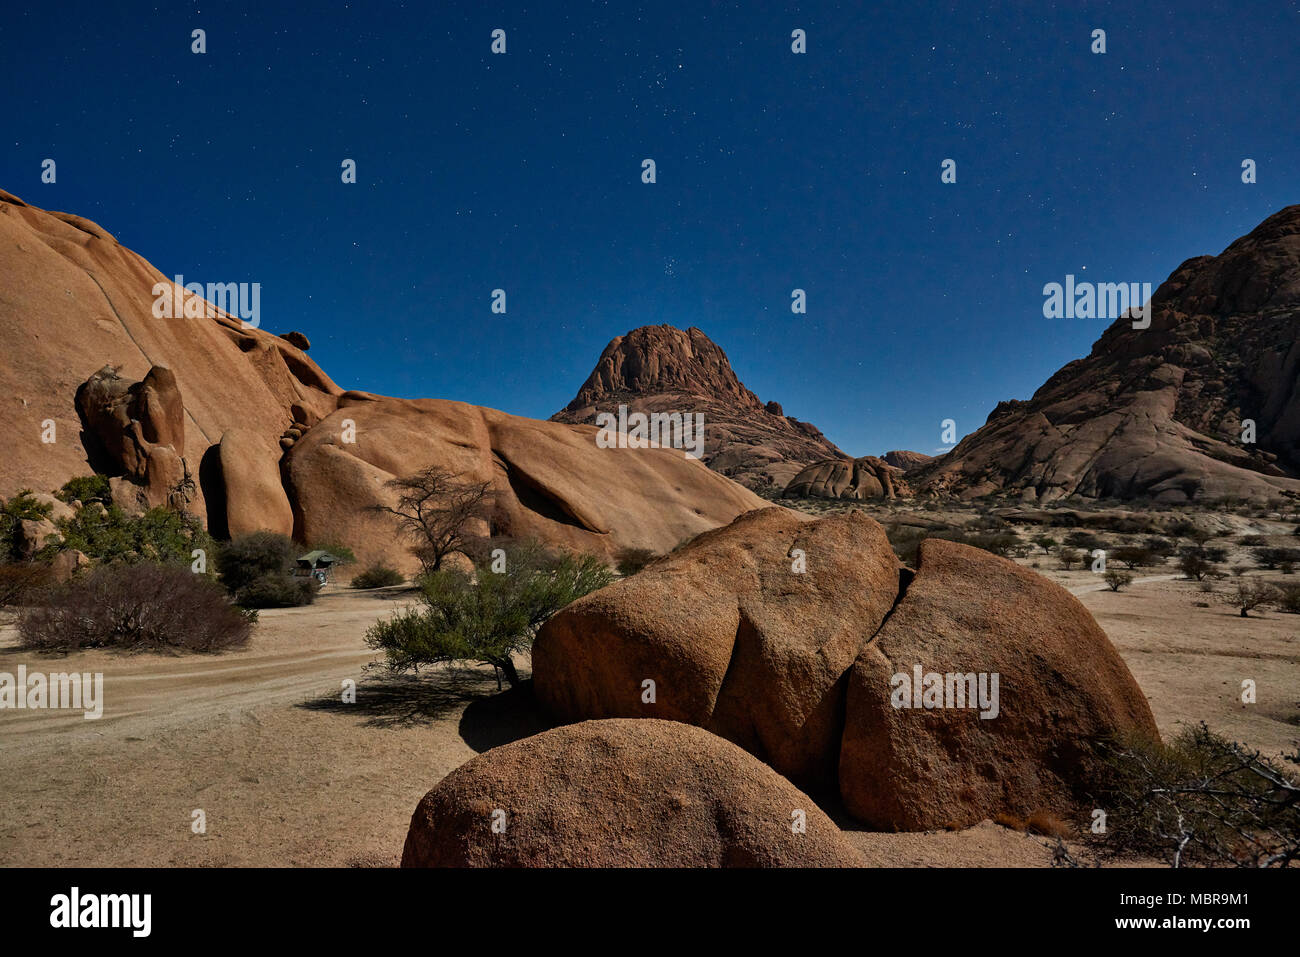 night shot under moonlight with stars of Spitzkoppe Stock Photo